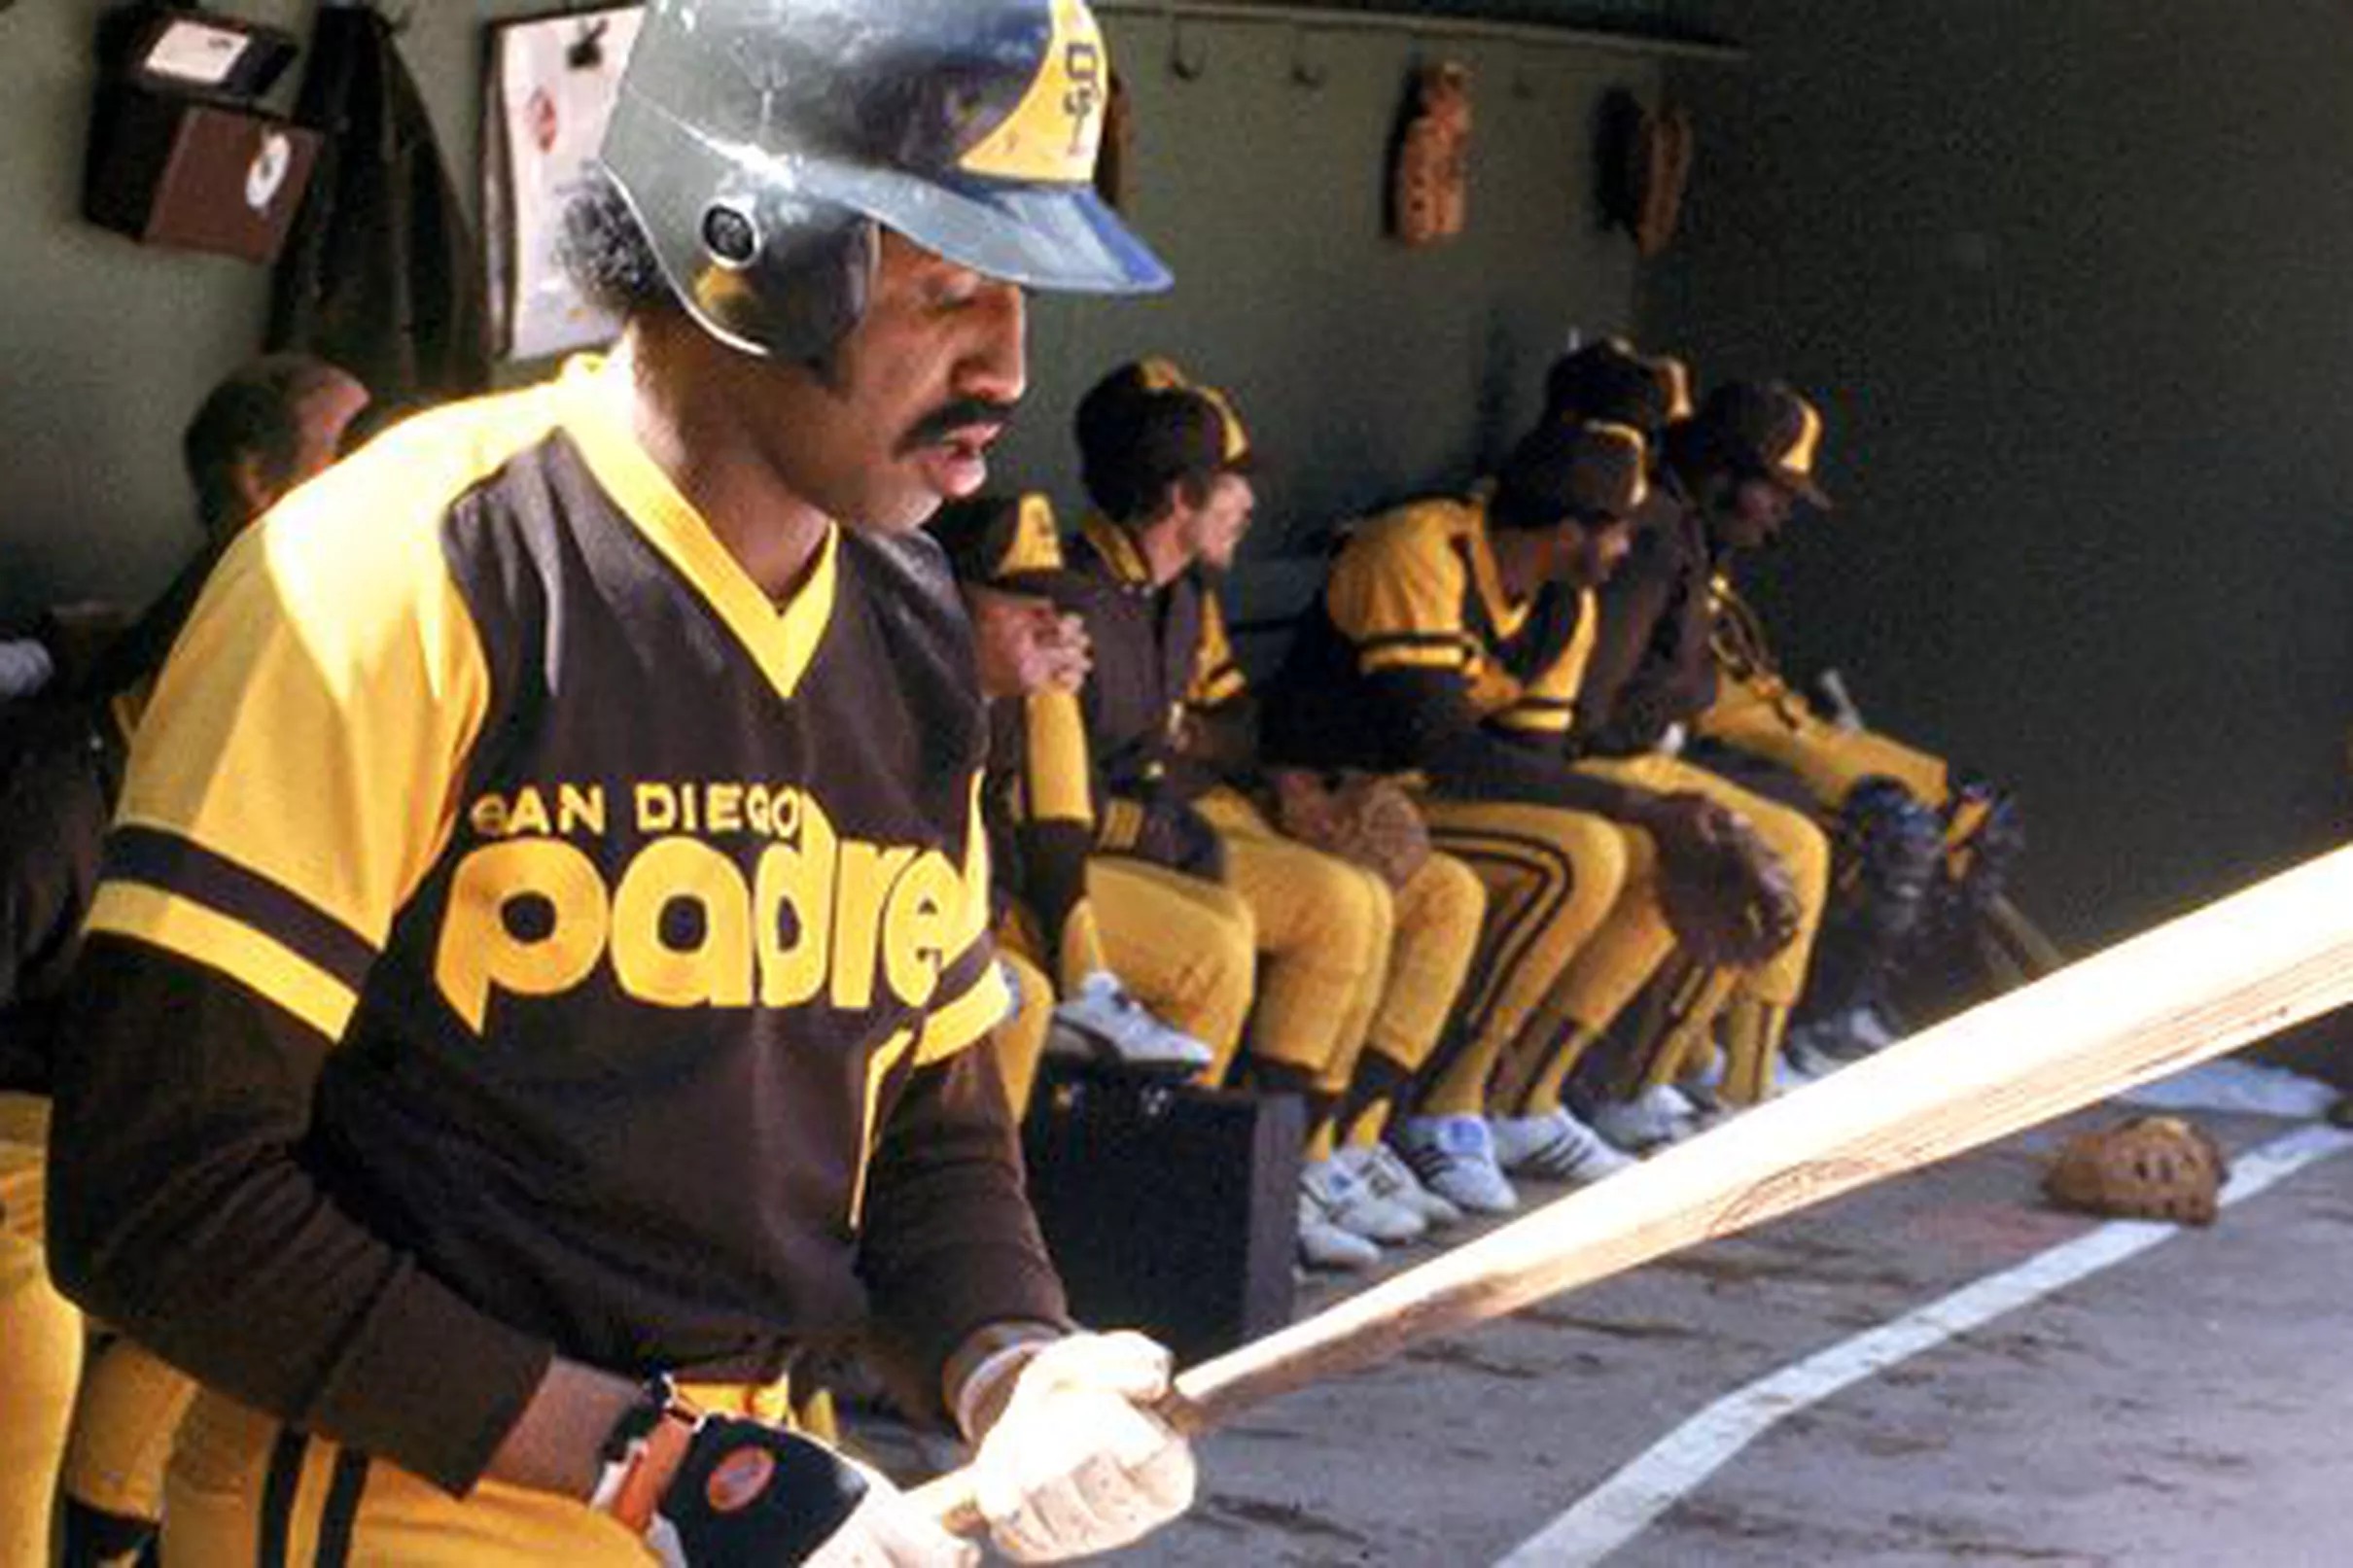 Padres new uniforms are coming soon